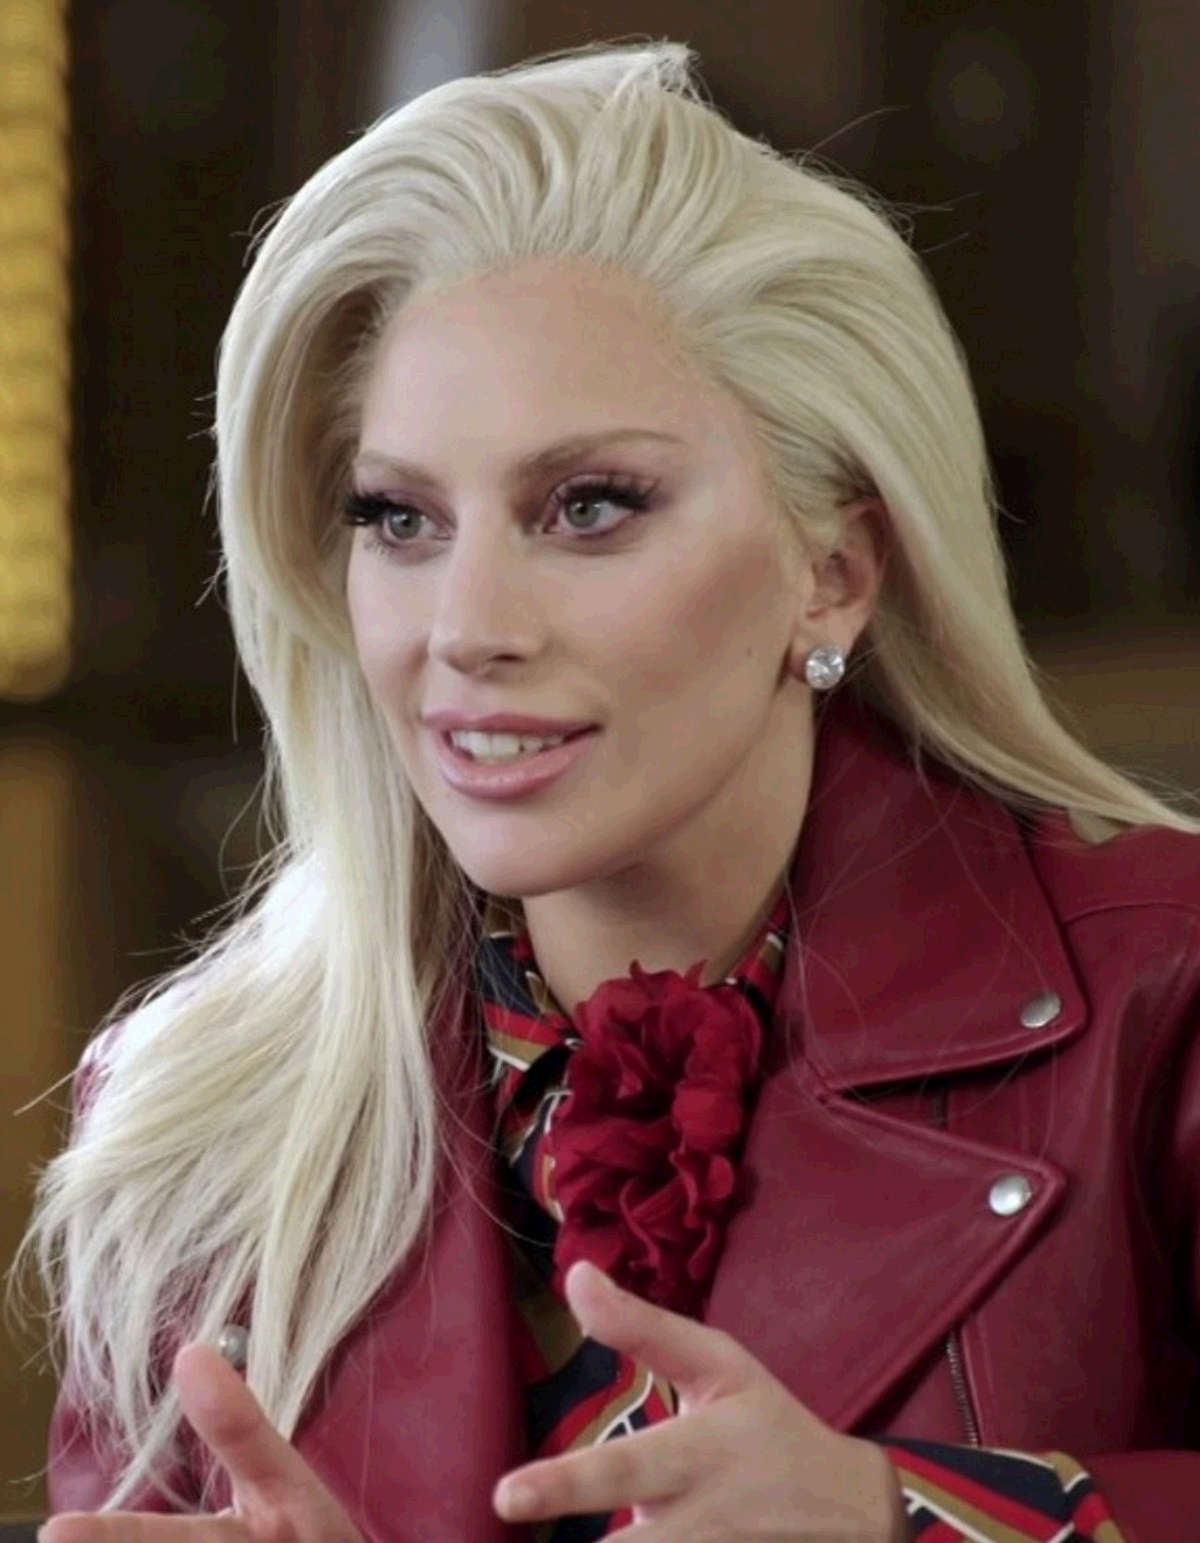 Lady Gaga during an interview for NFL Network in 2016.